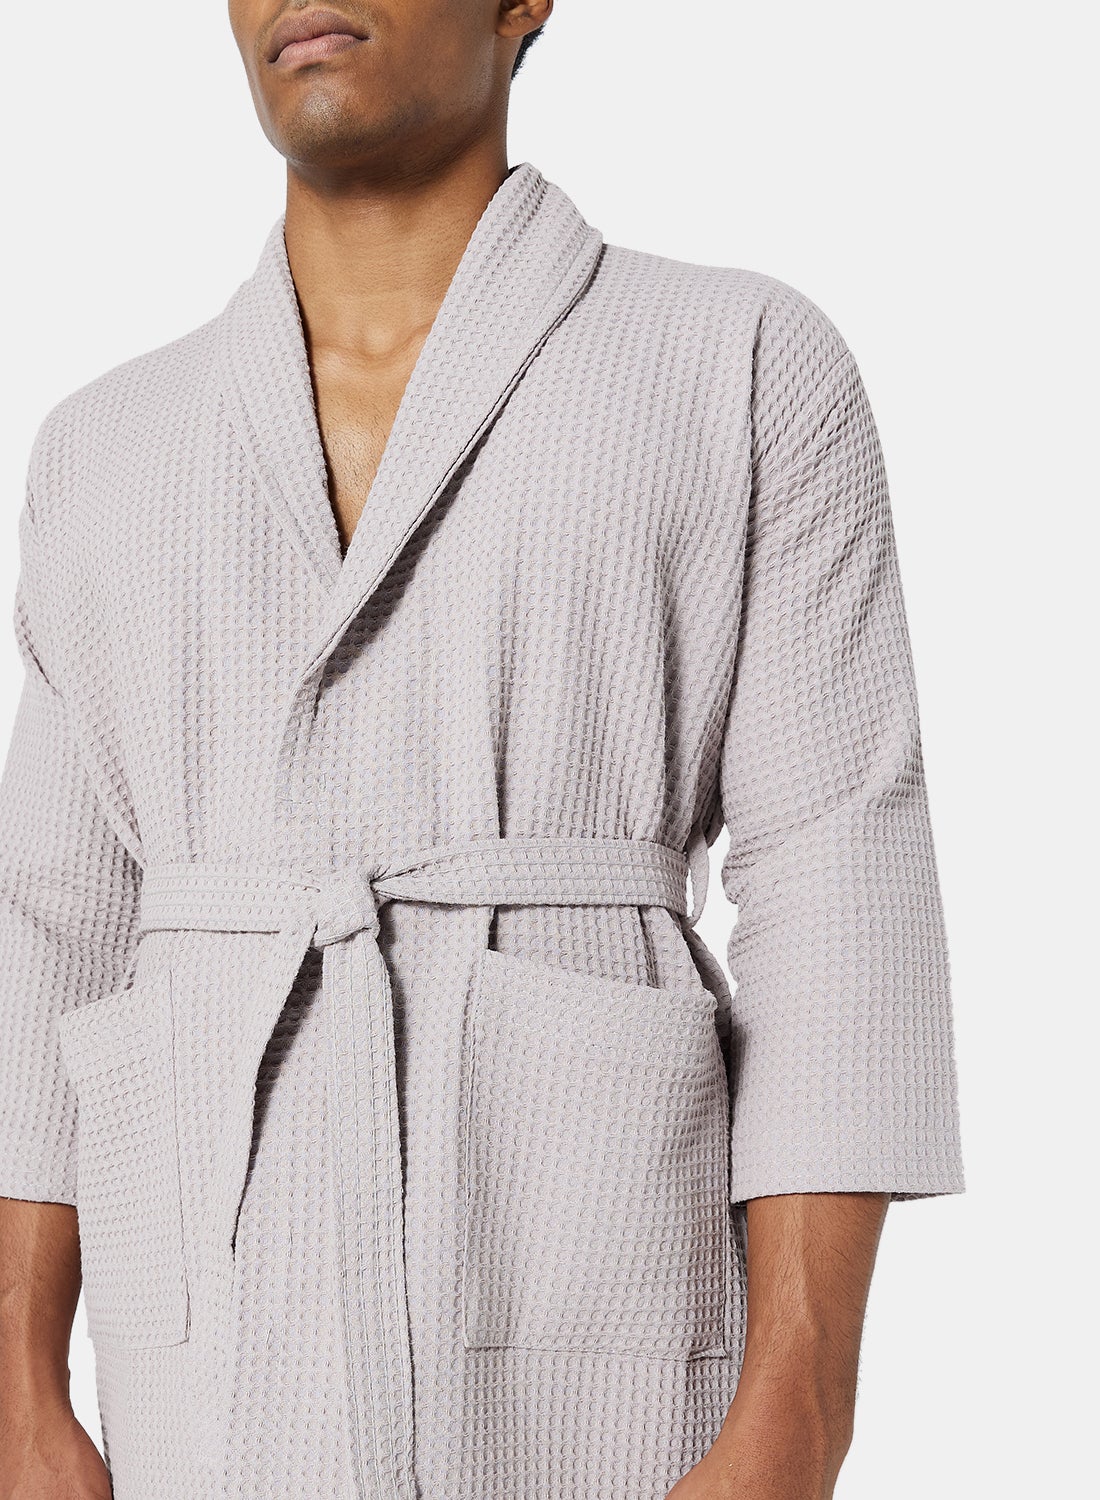 Bathrobe - 280 GSM 100% Cotton Waffle Quick Dry And Lightweight - Shawl Collar & Pocket - Silver Grey Color - 1 Piece 